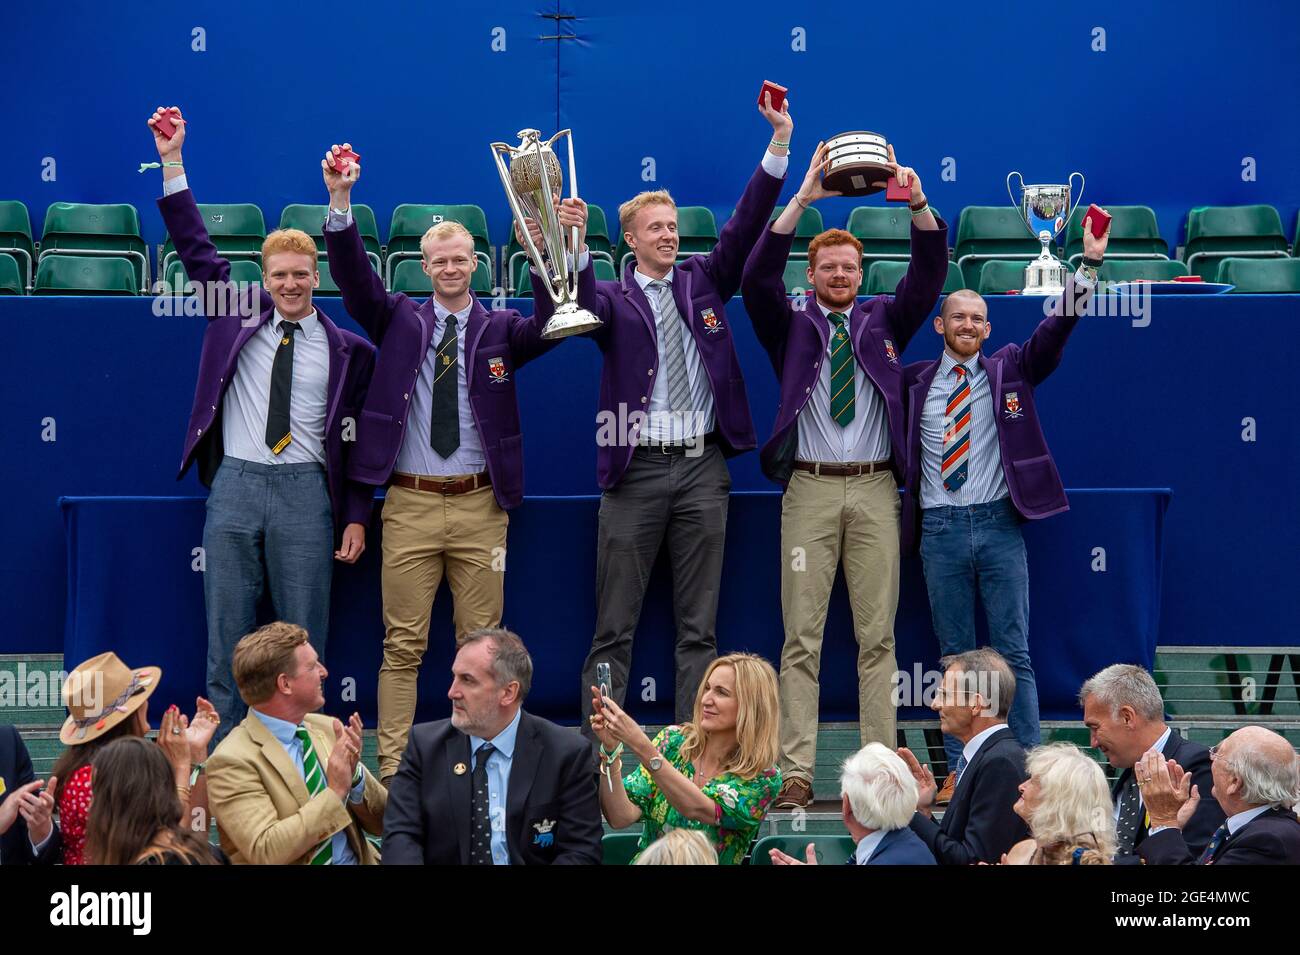 Henley-upon-Thames, Oxfordshire, UK. 15th August, 2021. University of London winners of the Prince Albert Challenge Cup Men's Four Oars with Coxswain on Finals Day at Henley Royal Regatta. Credit: Maureen McLean/Alamy Stock Photo